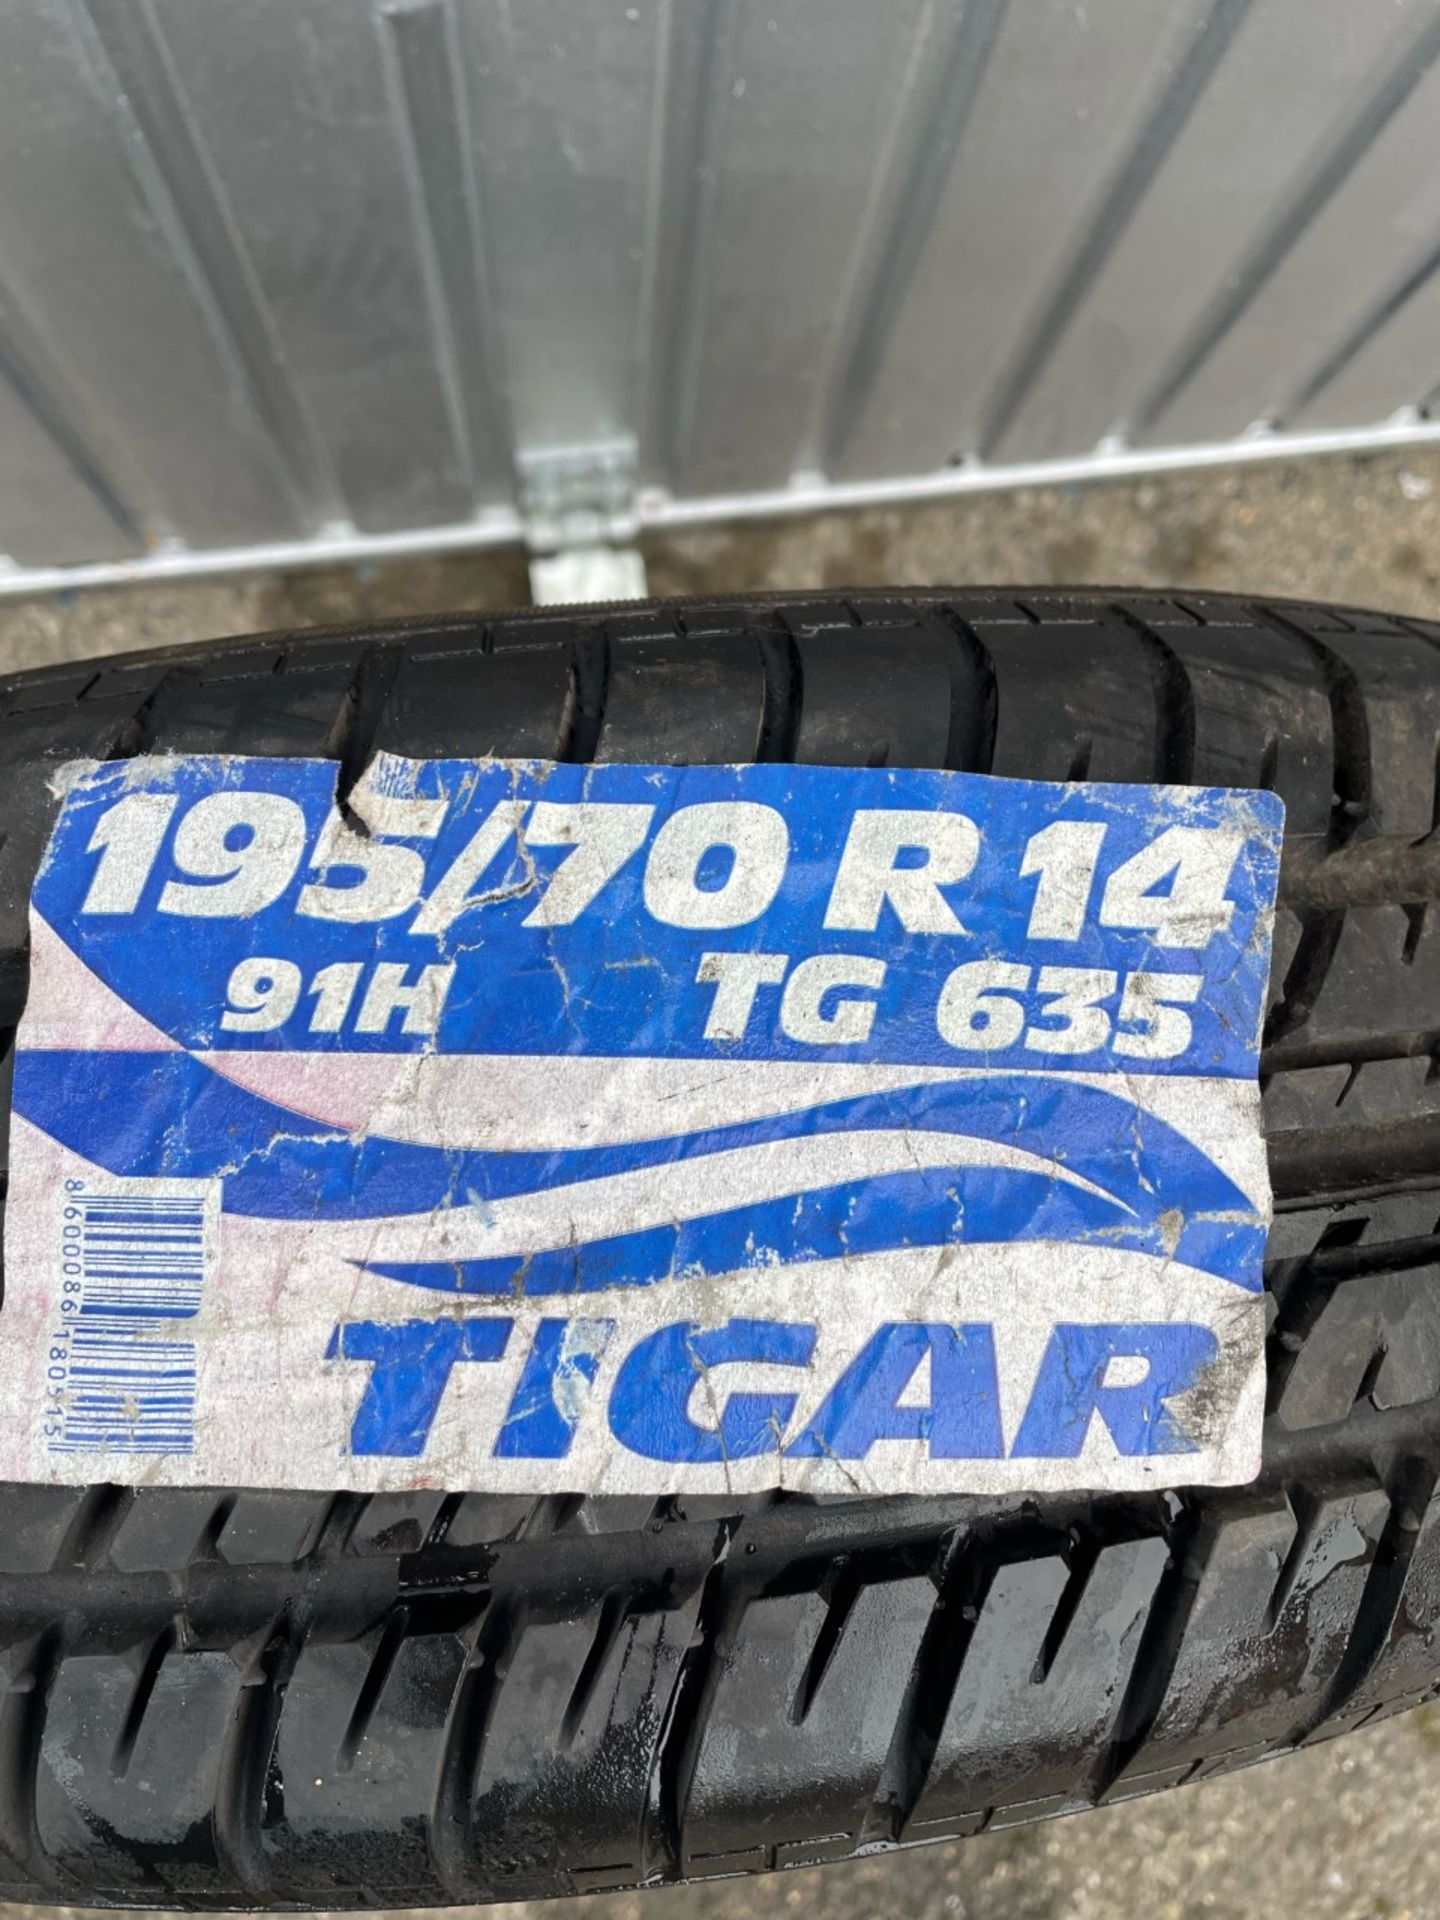 Tiger TG635 new tyre, 195/70 R14 91H